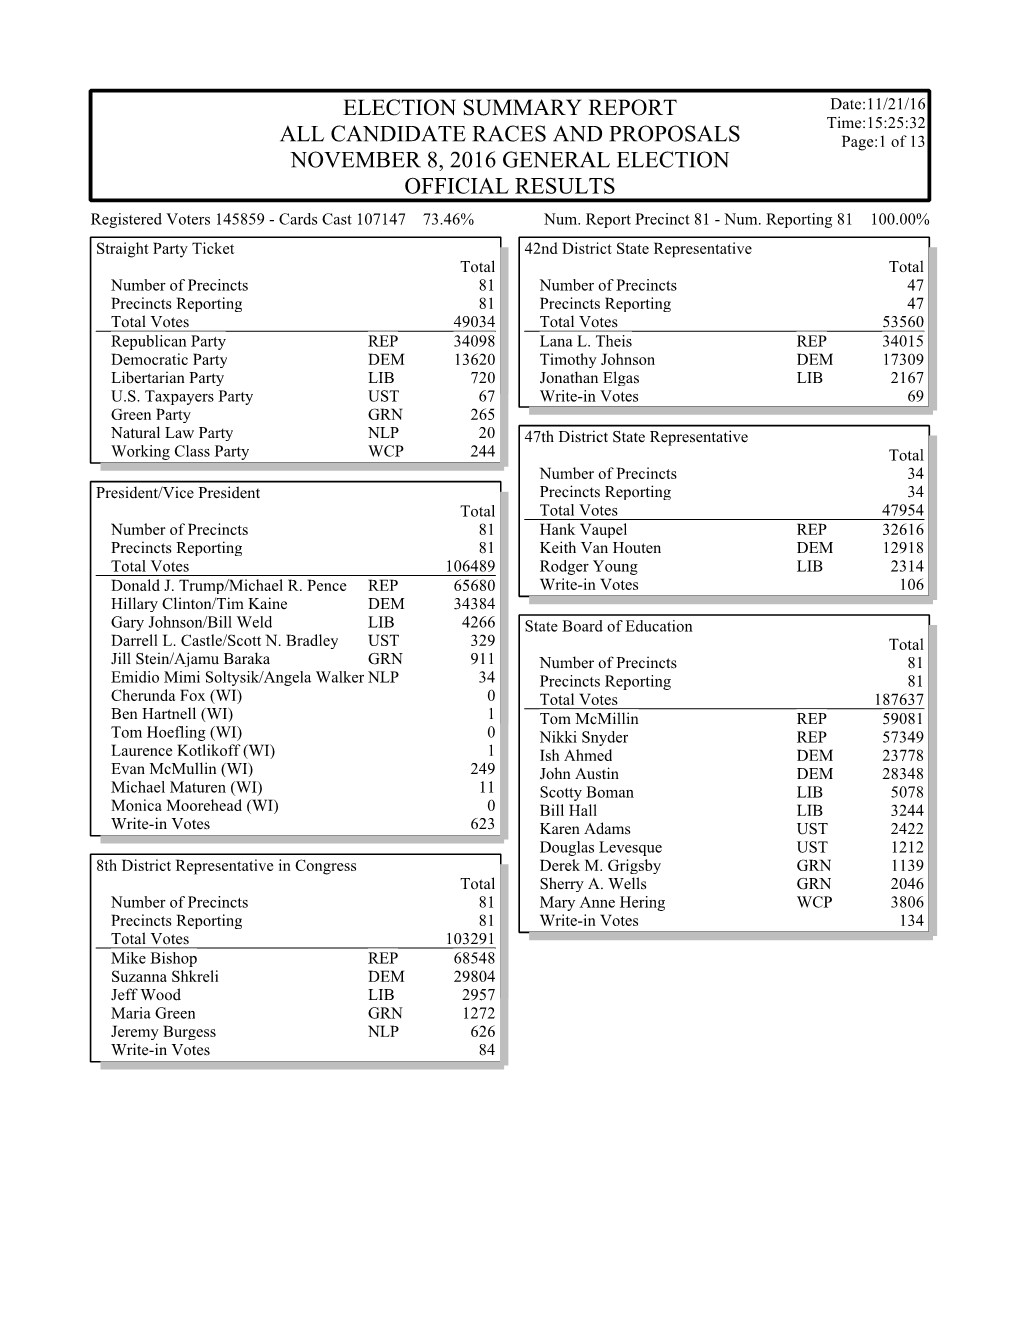 Election Summary Report All Candidate Races and Proposals November 8